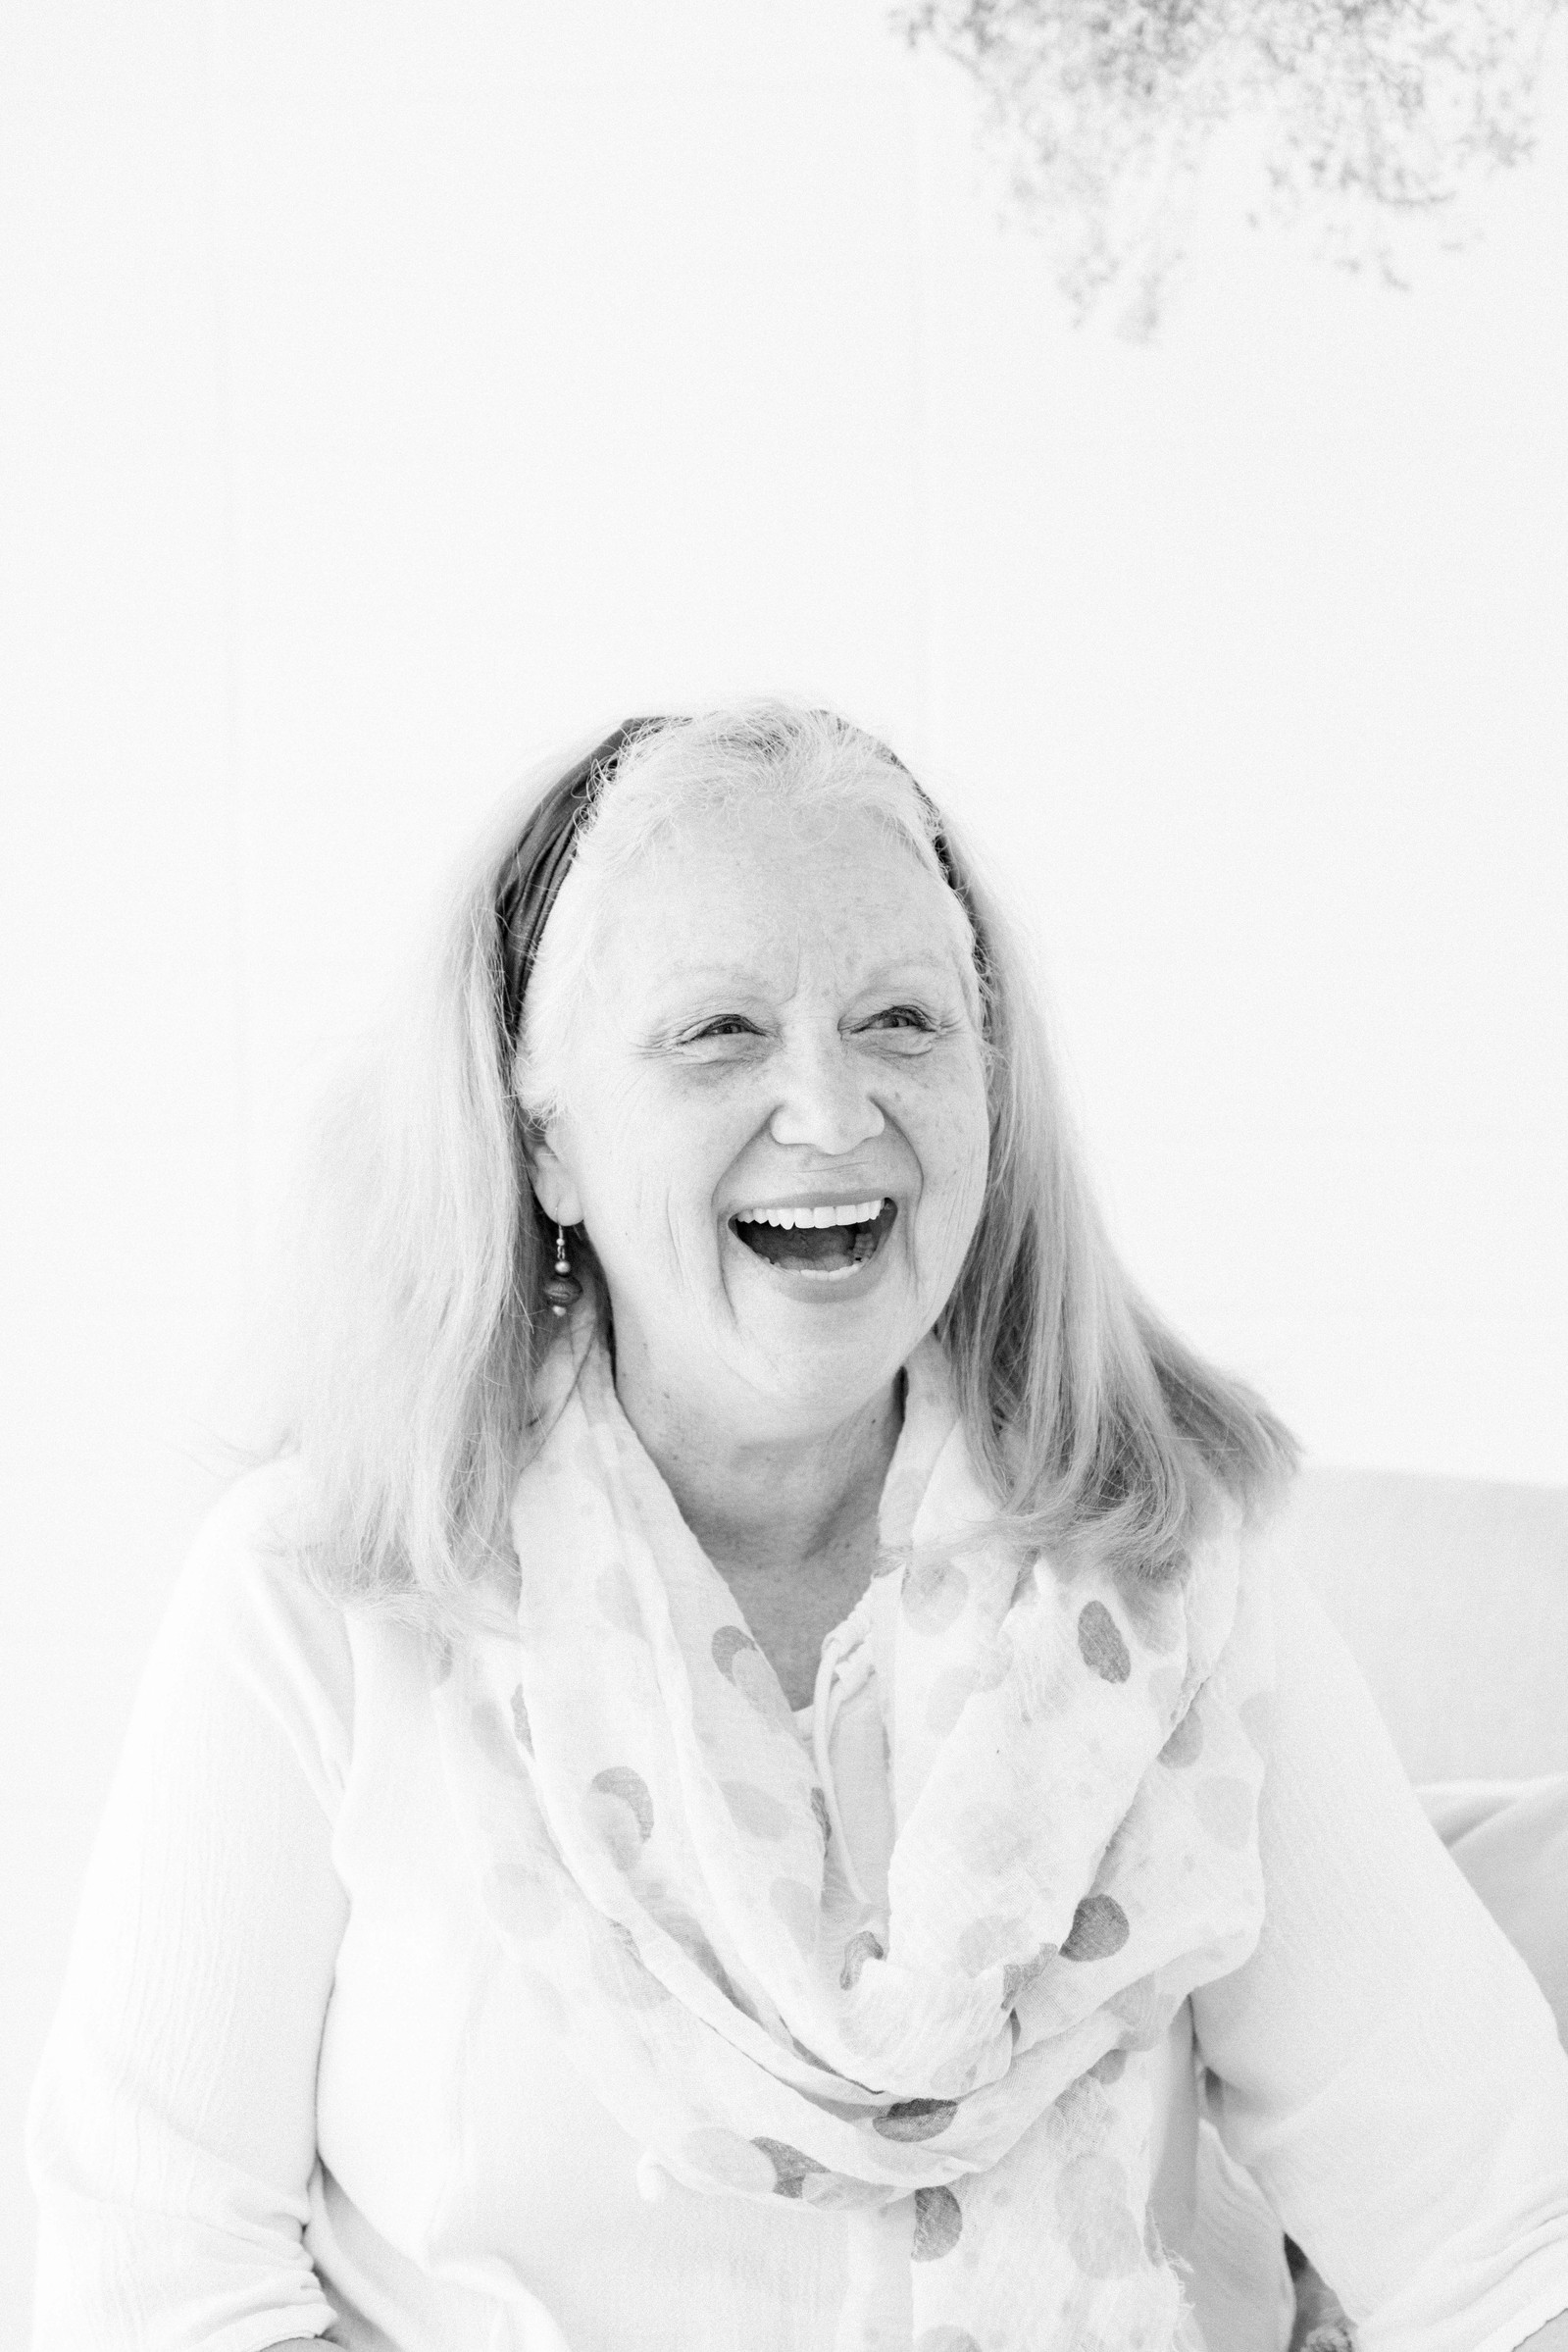 Black and white portrait of woman laughing. Emily VanderBeek Photography, branding photography, portrait photography, Niagara portrait photographer, Niagara branding photographer.